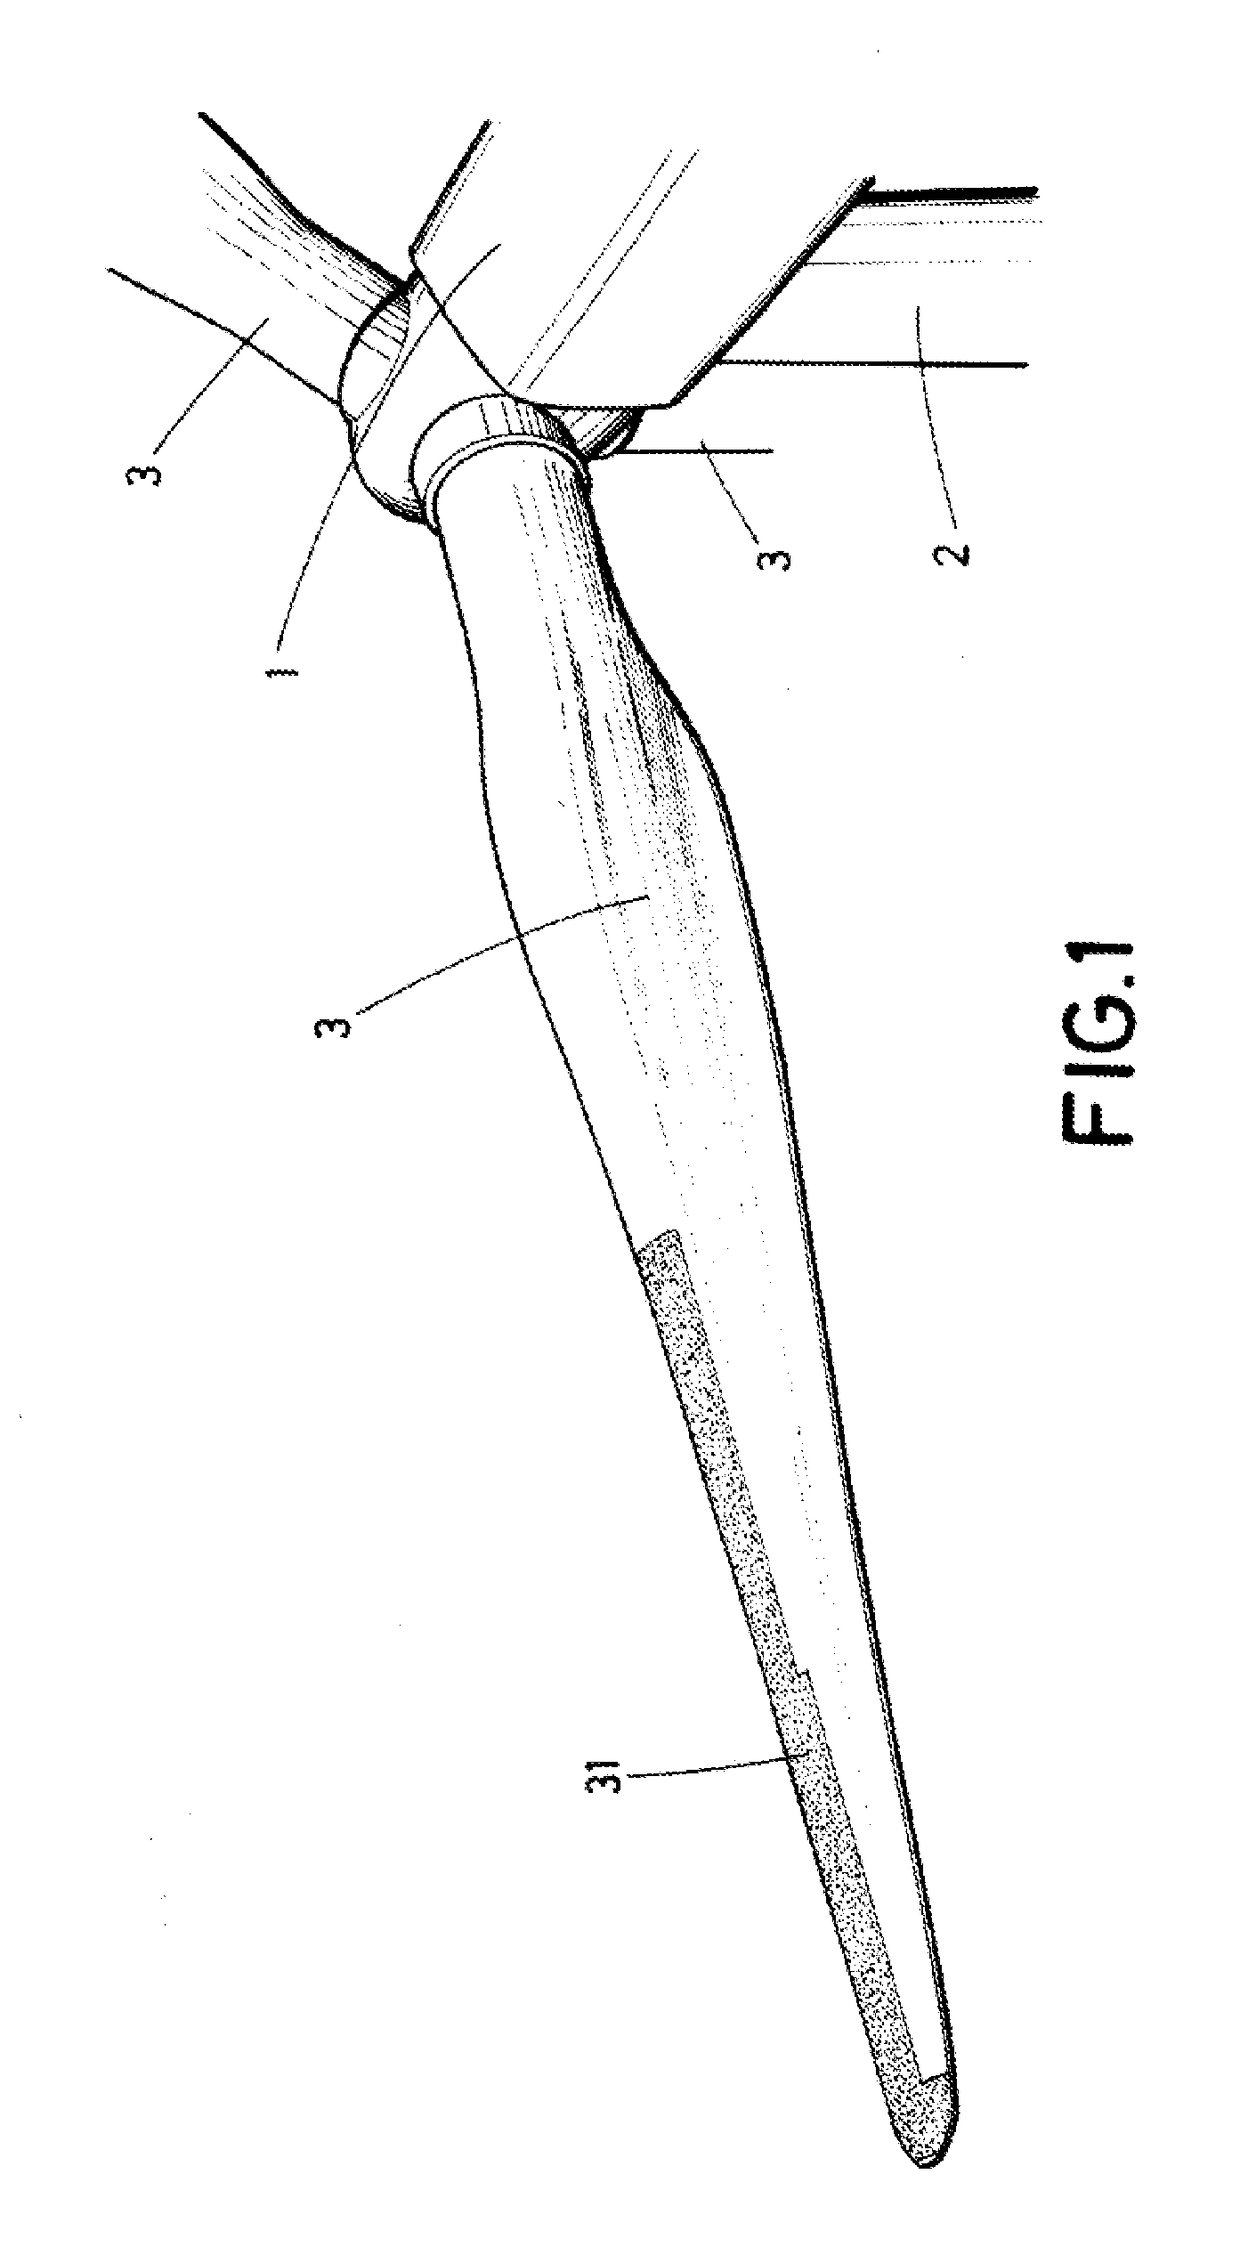 Wind turbine and method for ice removal in wind turbines